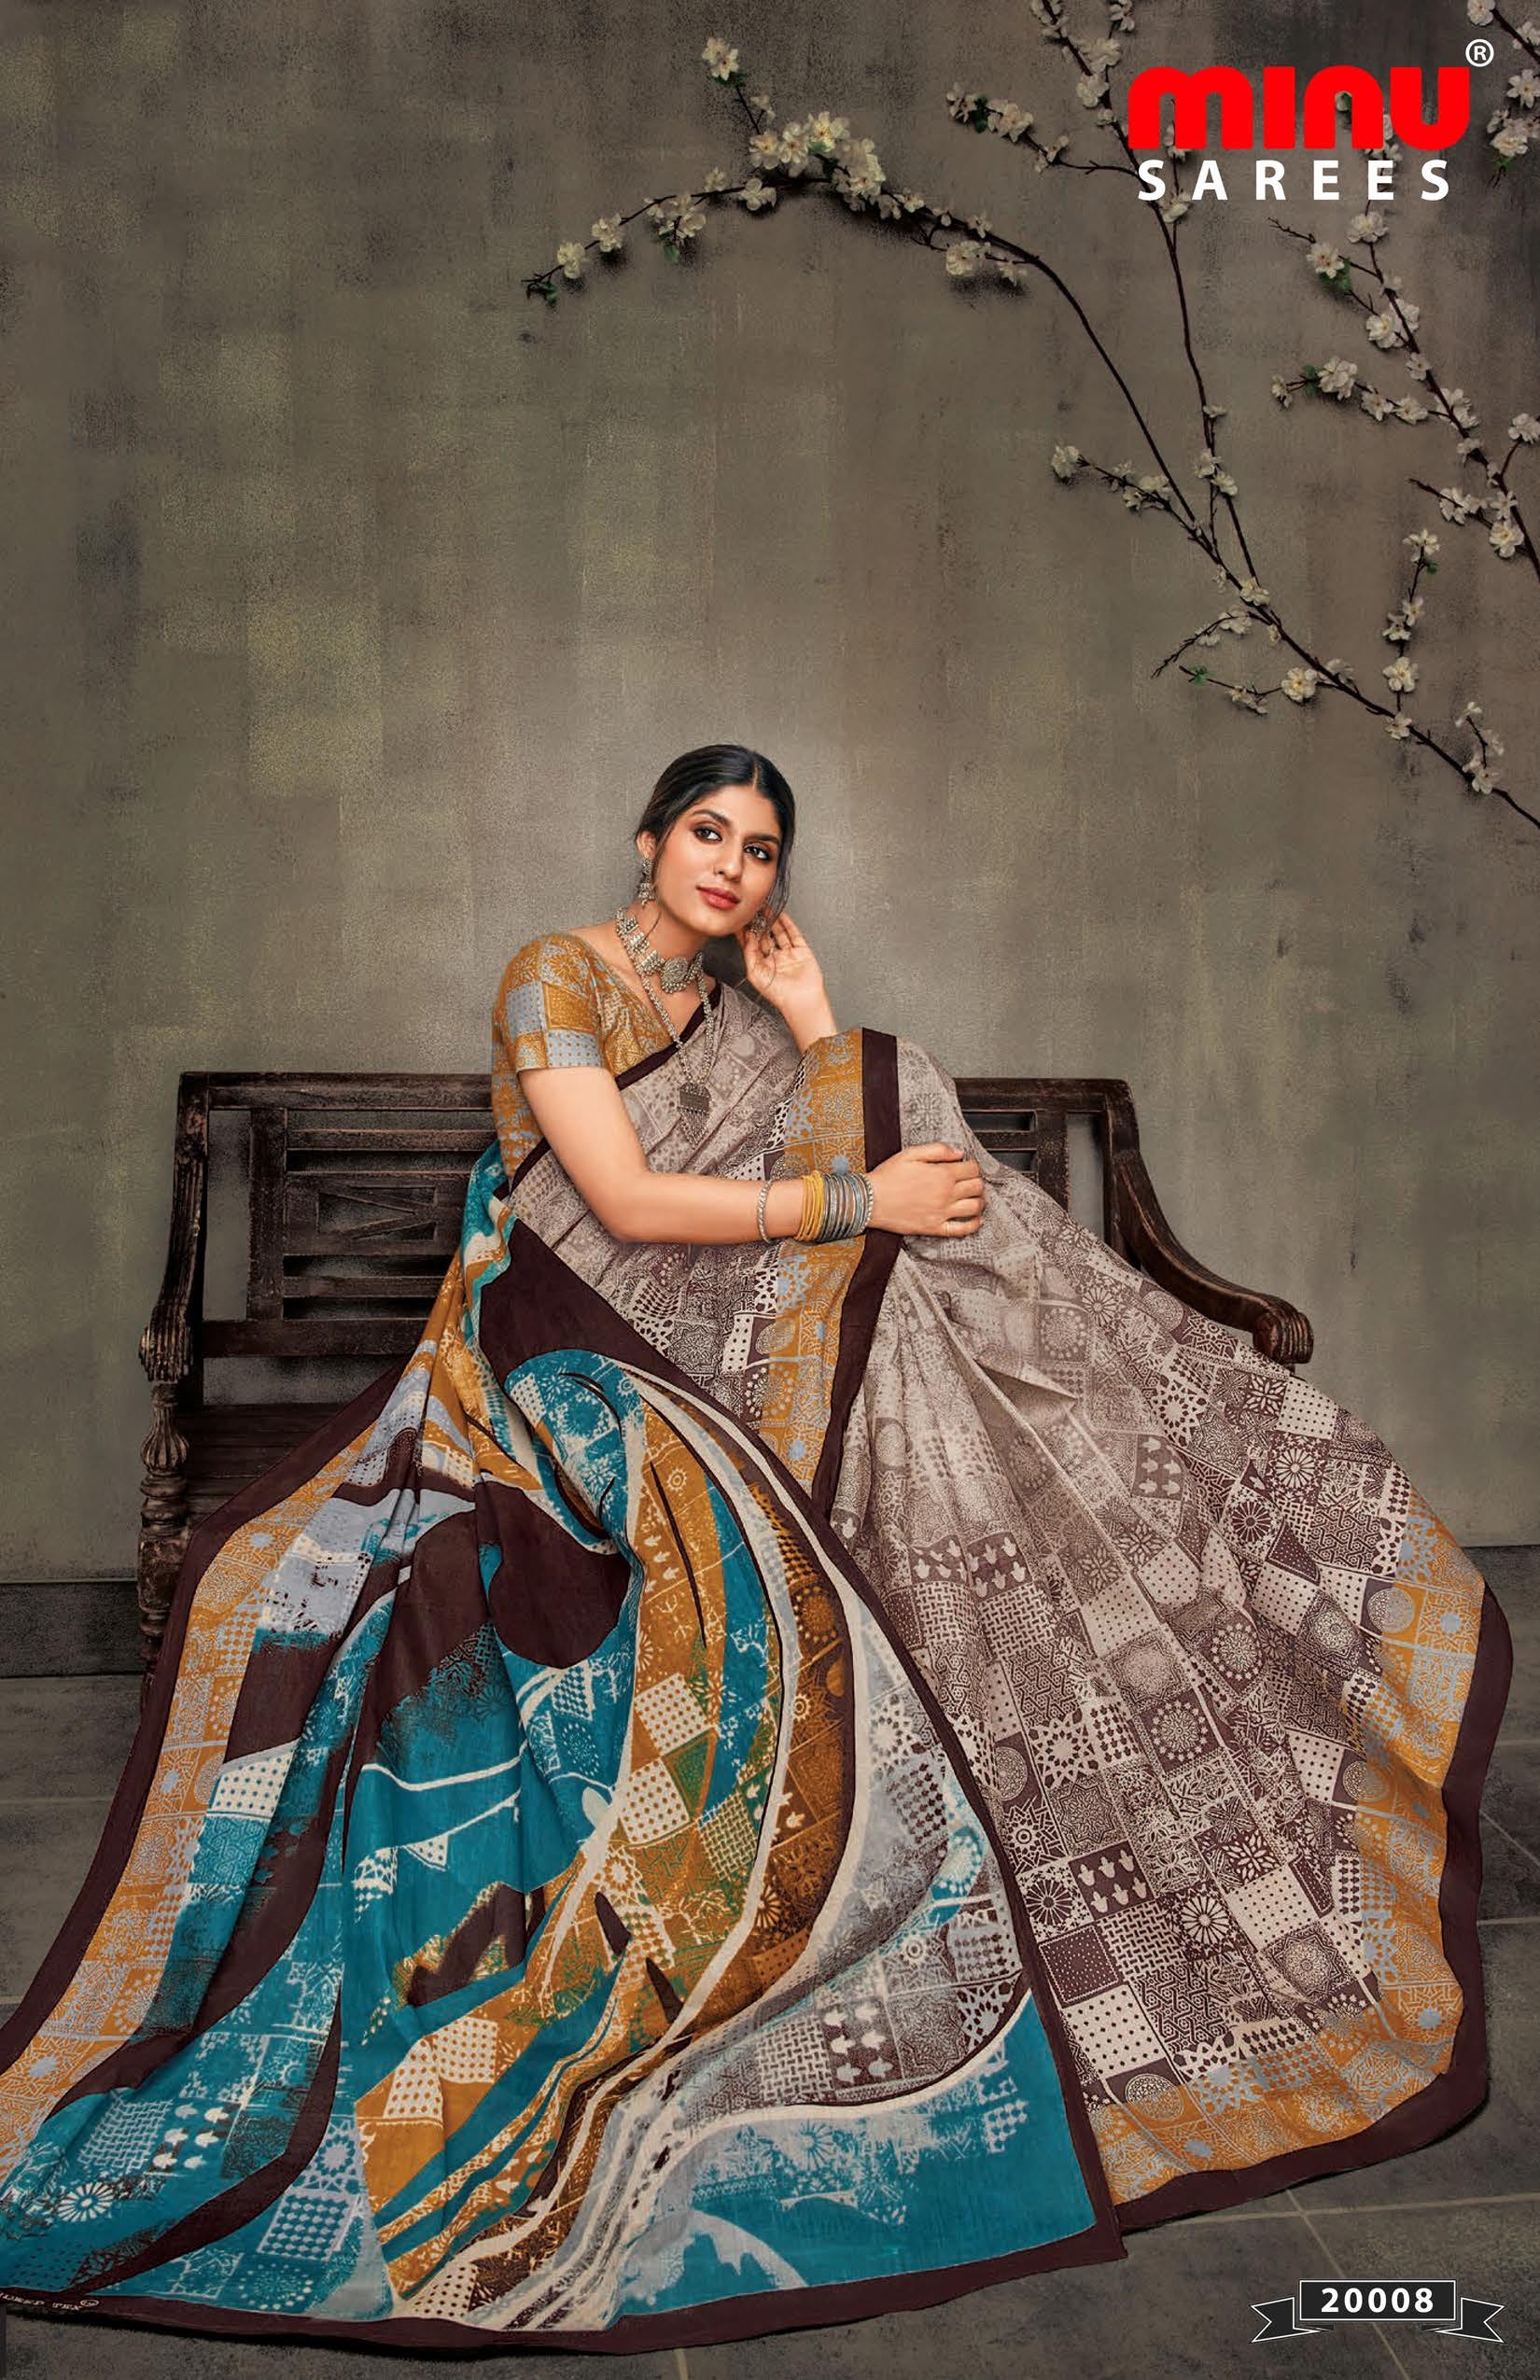 Online image of woman in a bold and designer printed saree